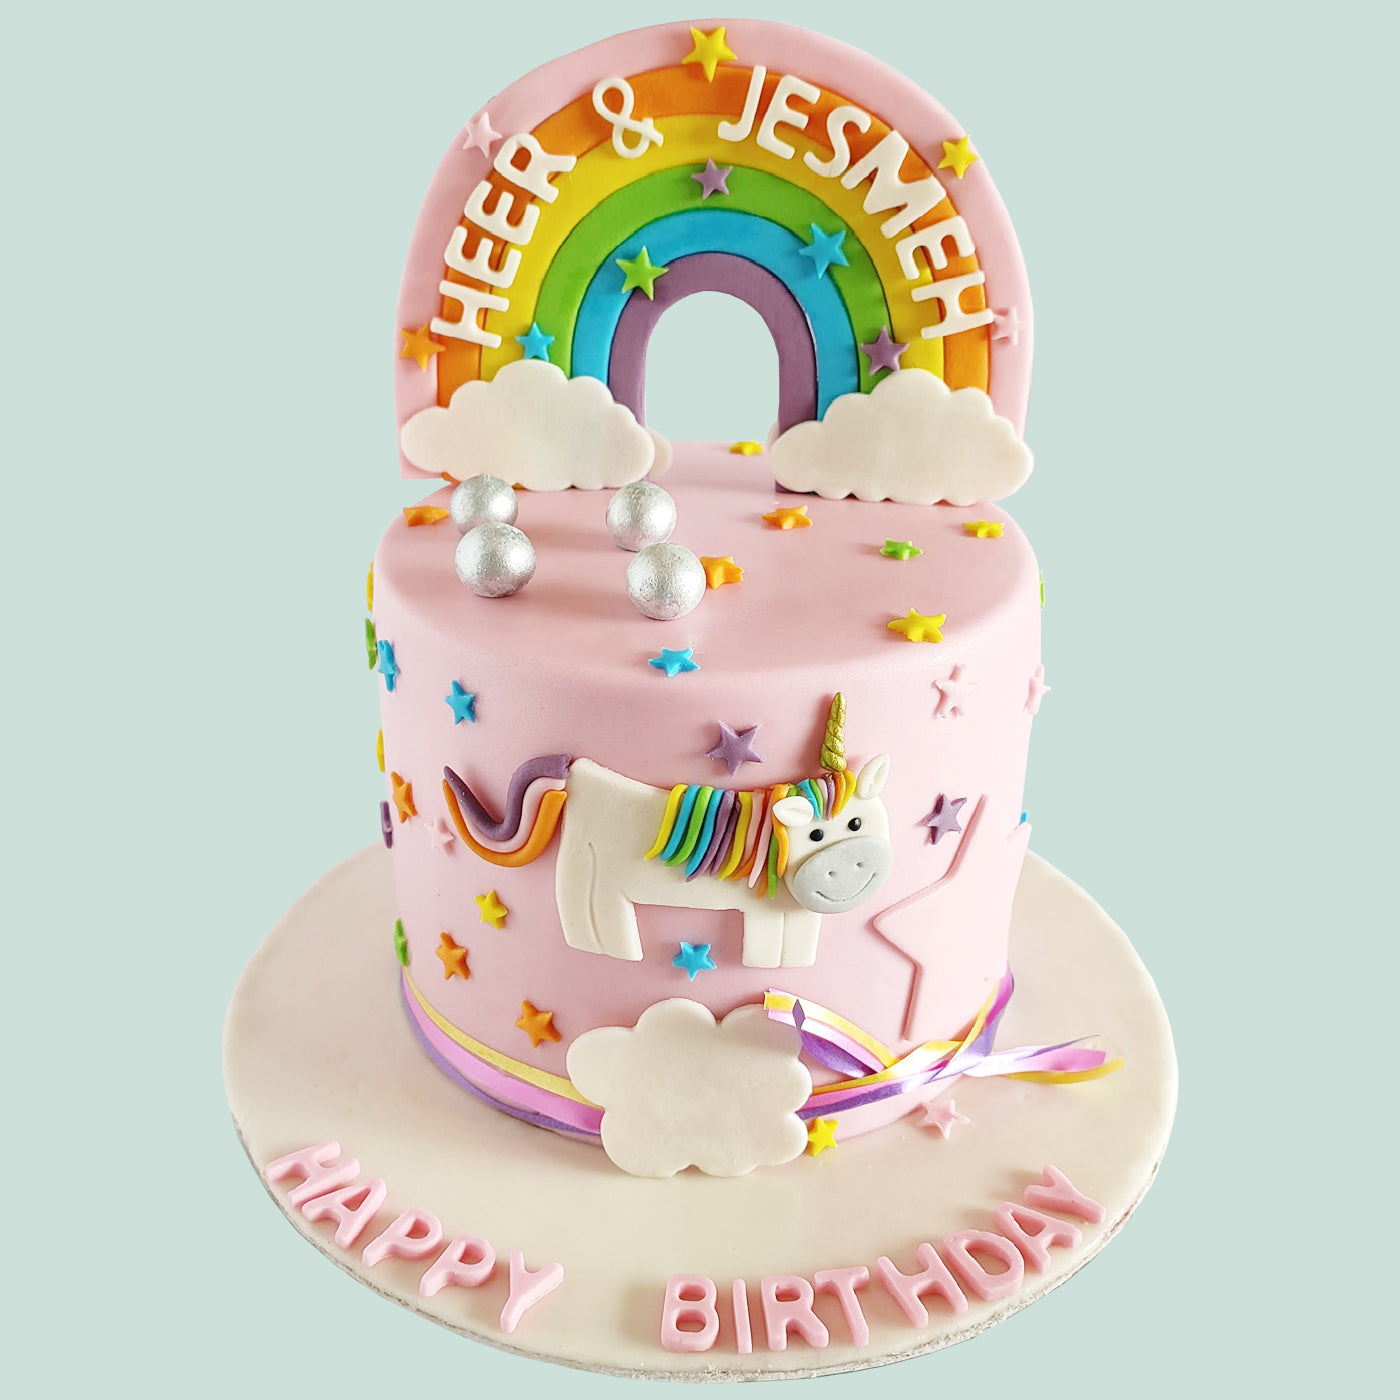 You Can Make Any Cake a Rainbow Cake - The Unlikely Baker®